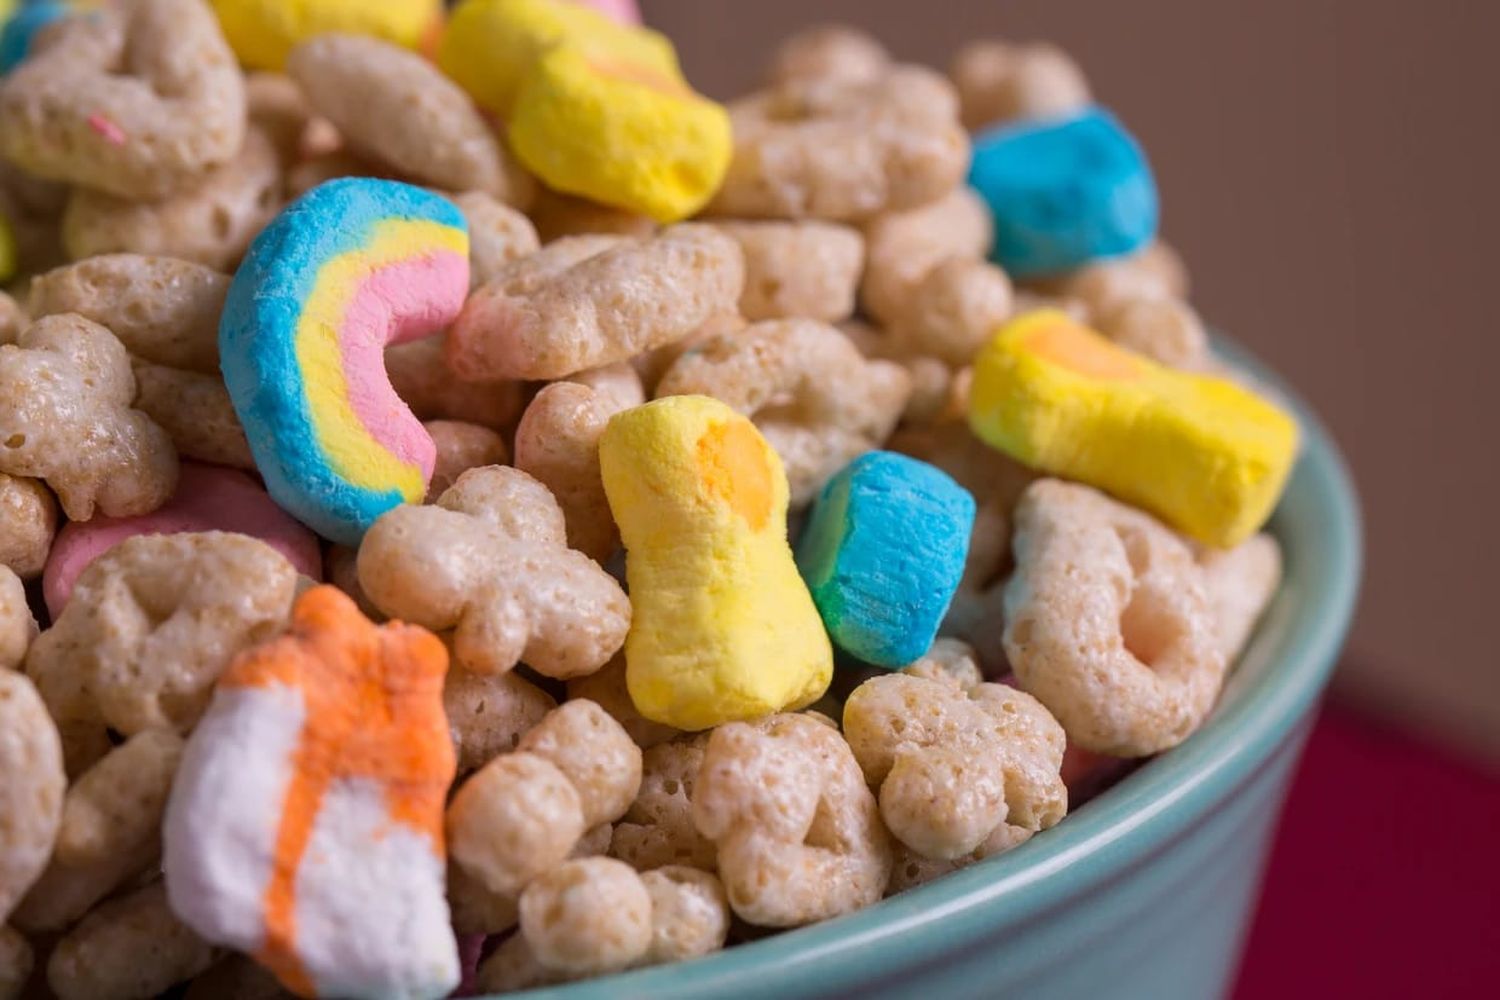 Artificial Dyed Cereals Image